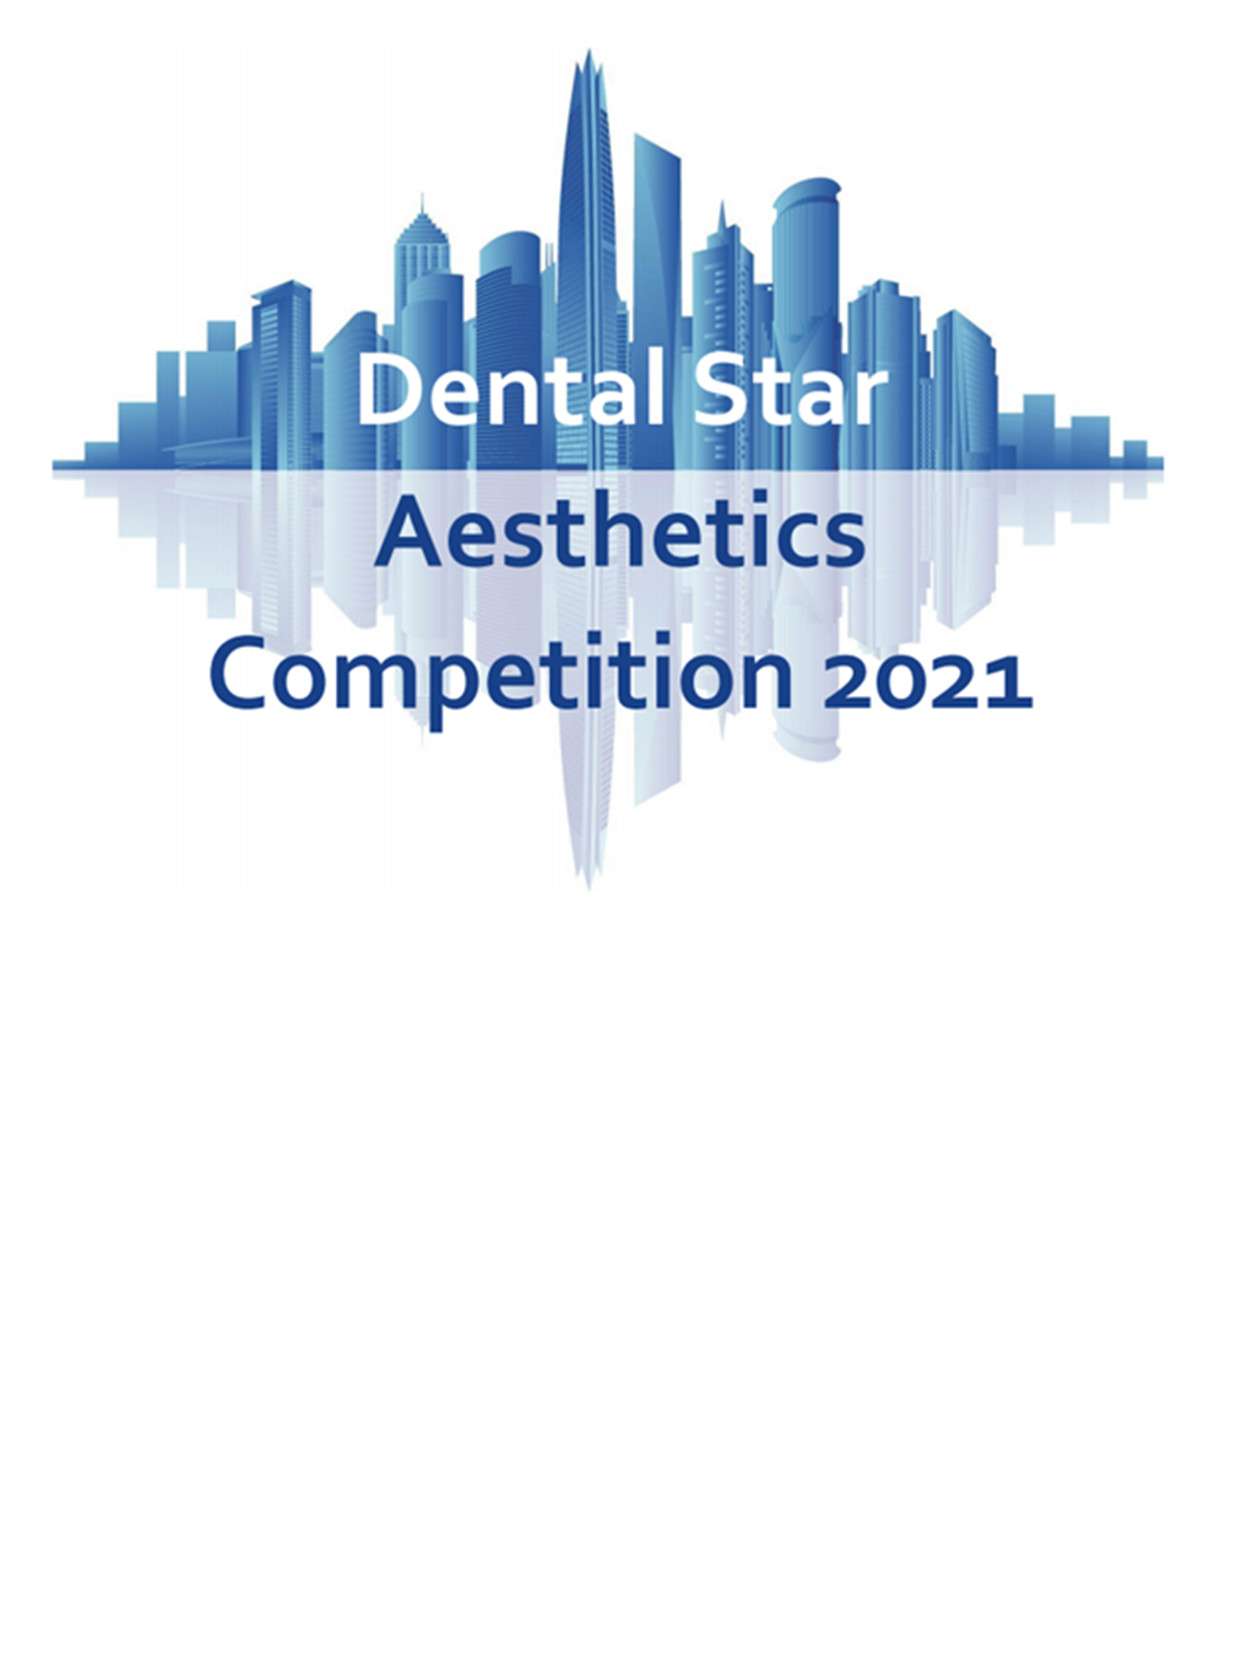 PPT Template [Dental Star Aesthetic Competition 2021]